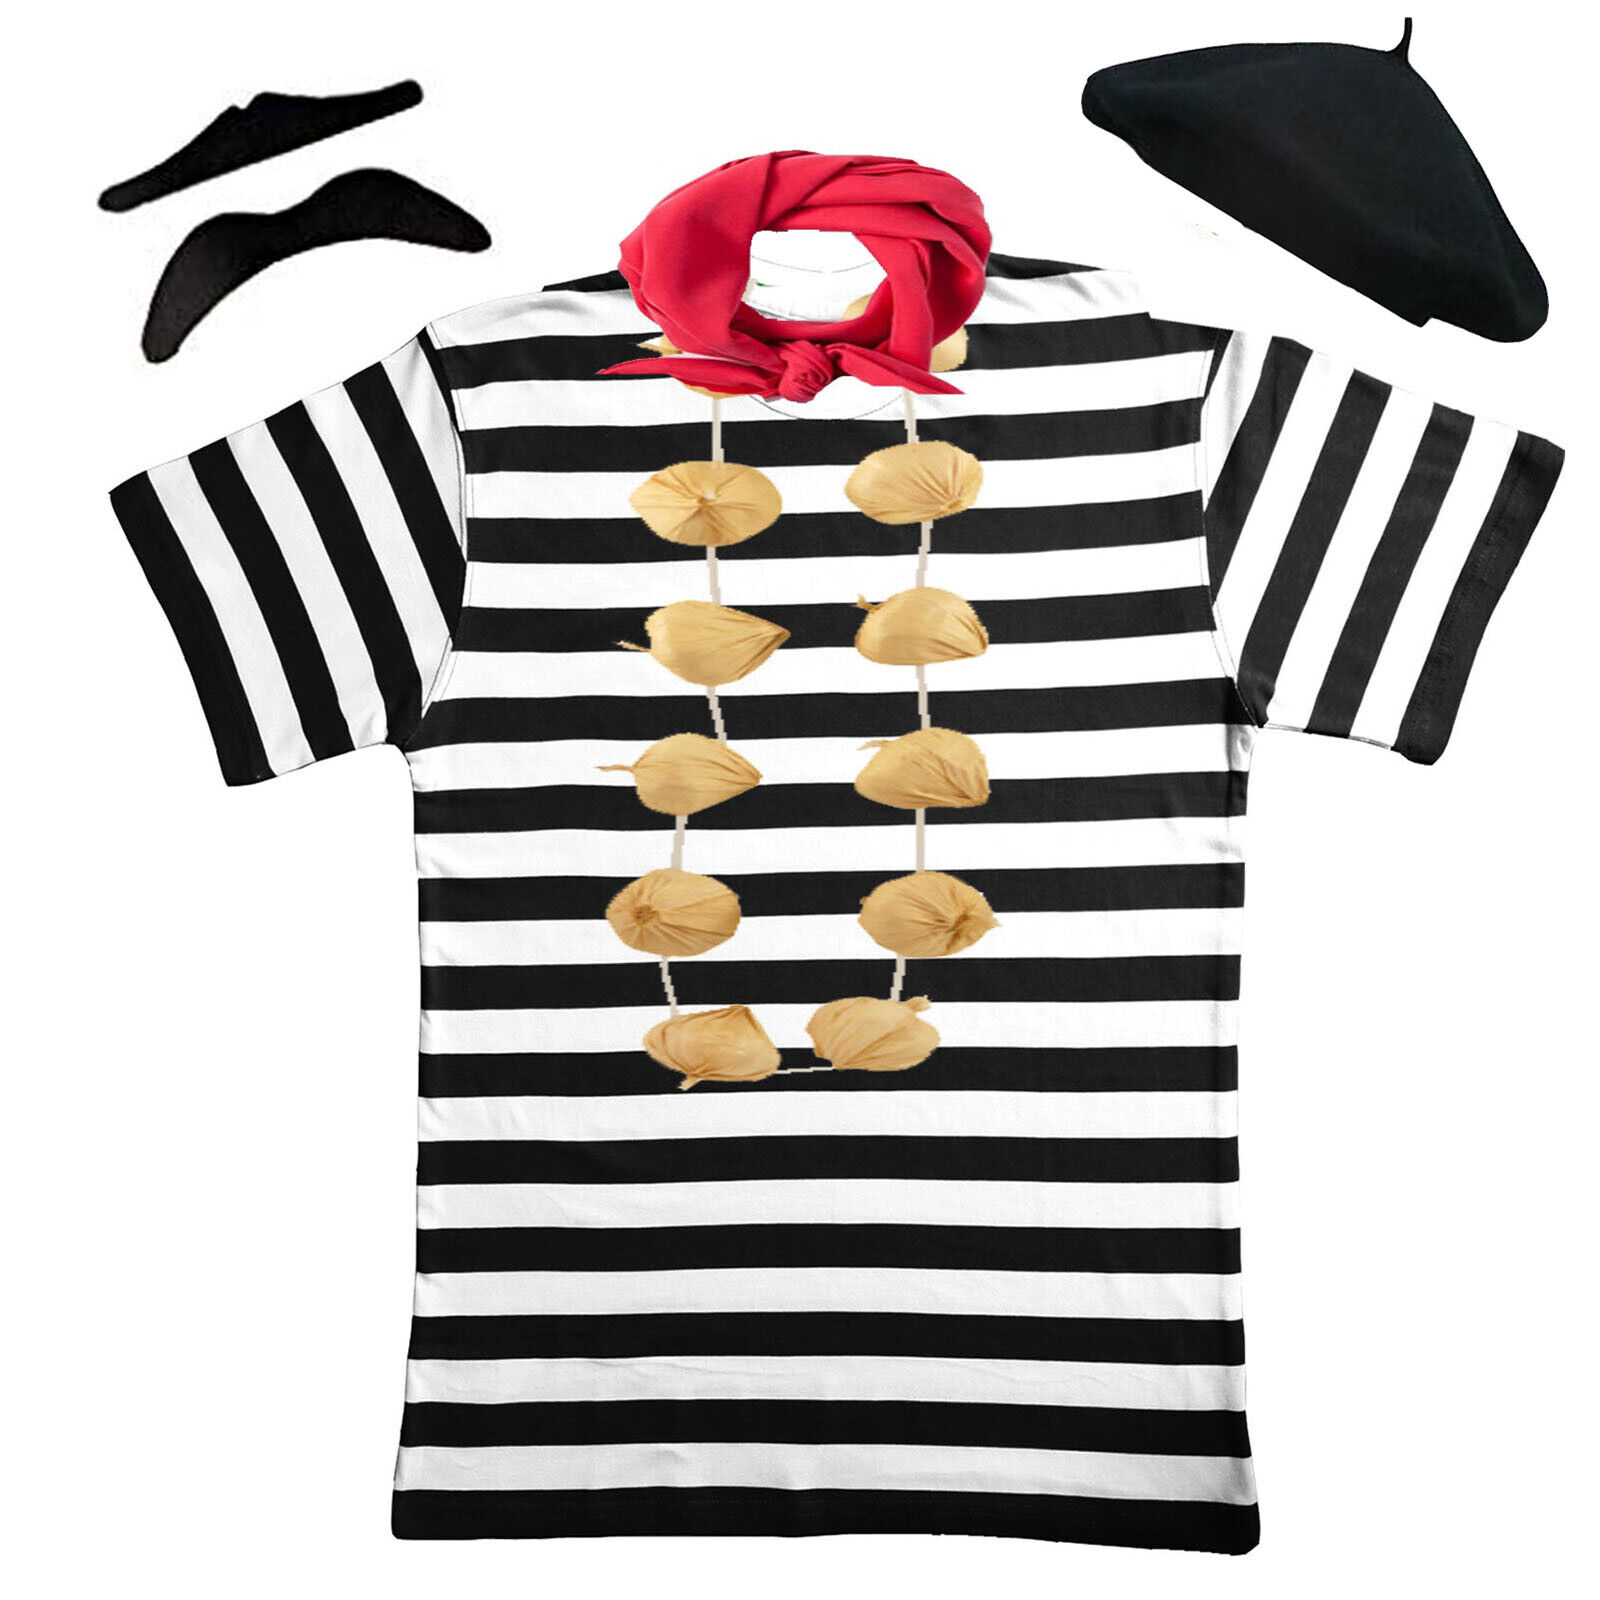 Adult FRENCH SET fancy dress costume Black White Striped Top Stag party  outfit | eBay